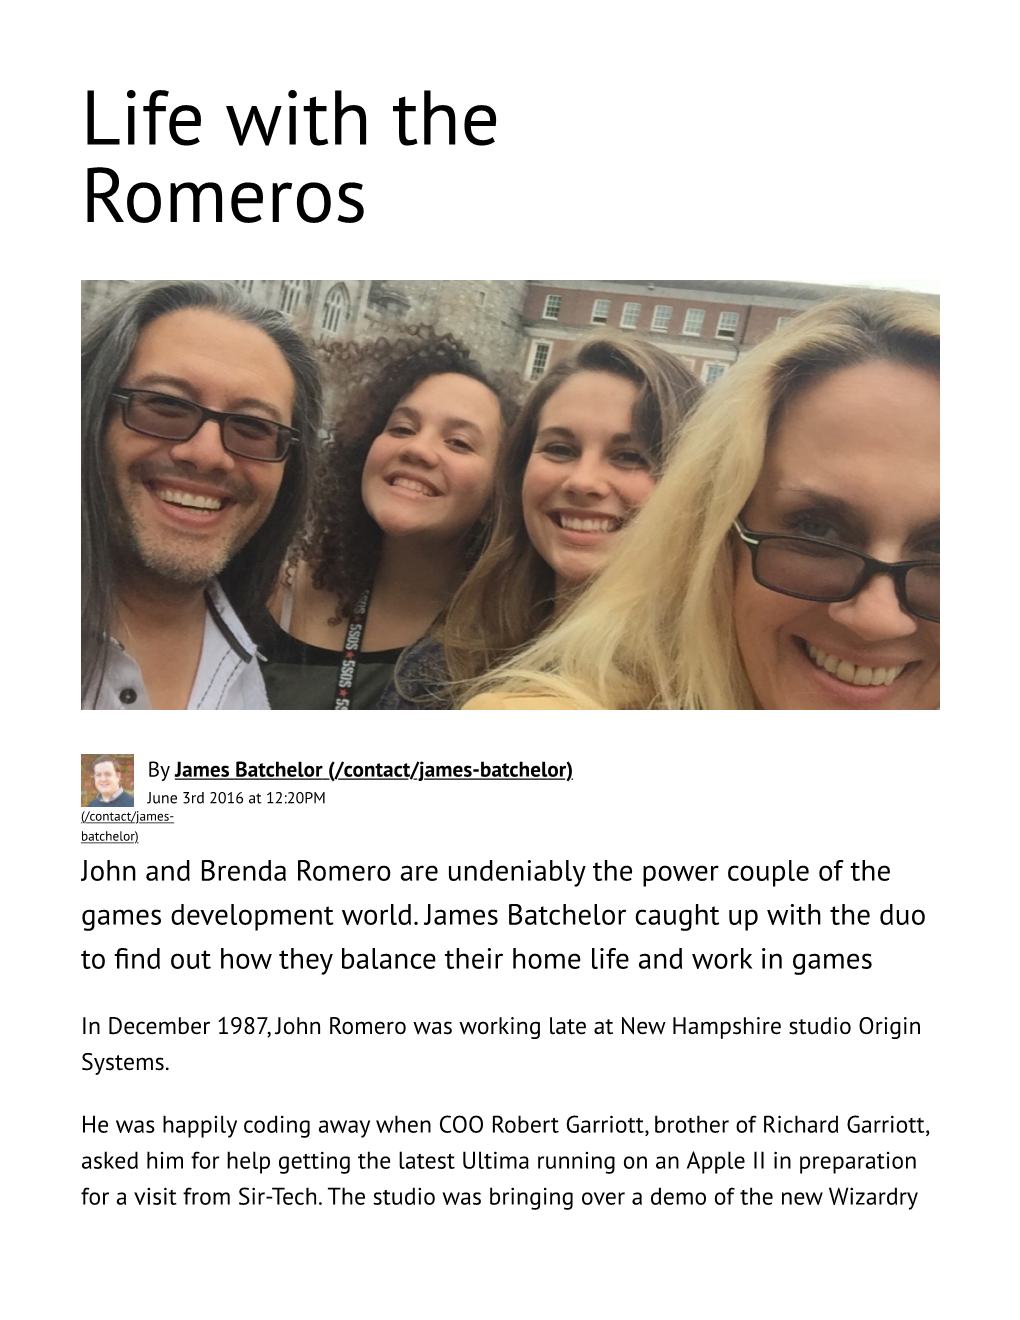 Life with the Romeros | Special Features | Develop